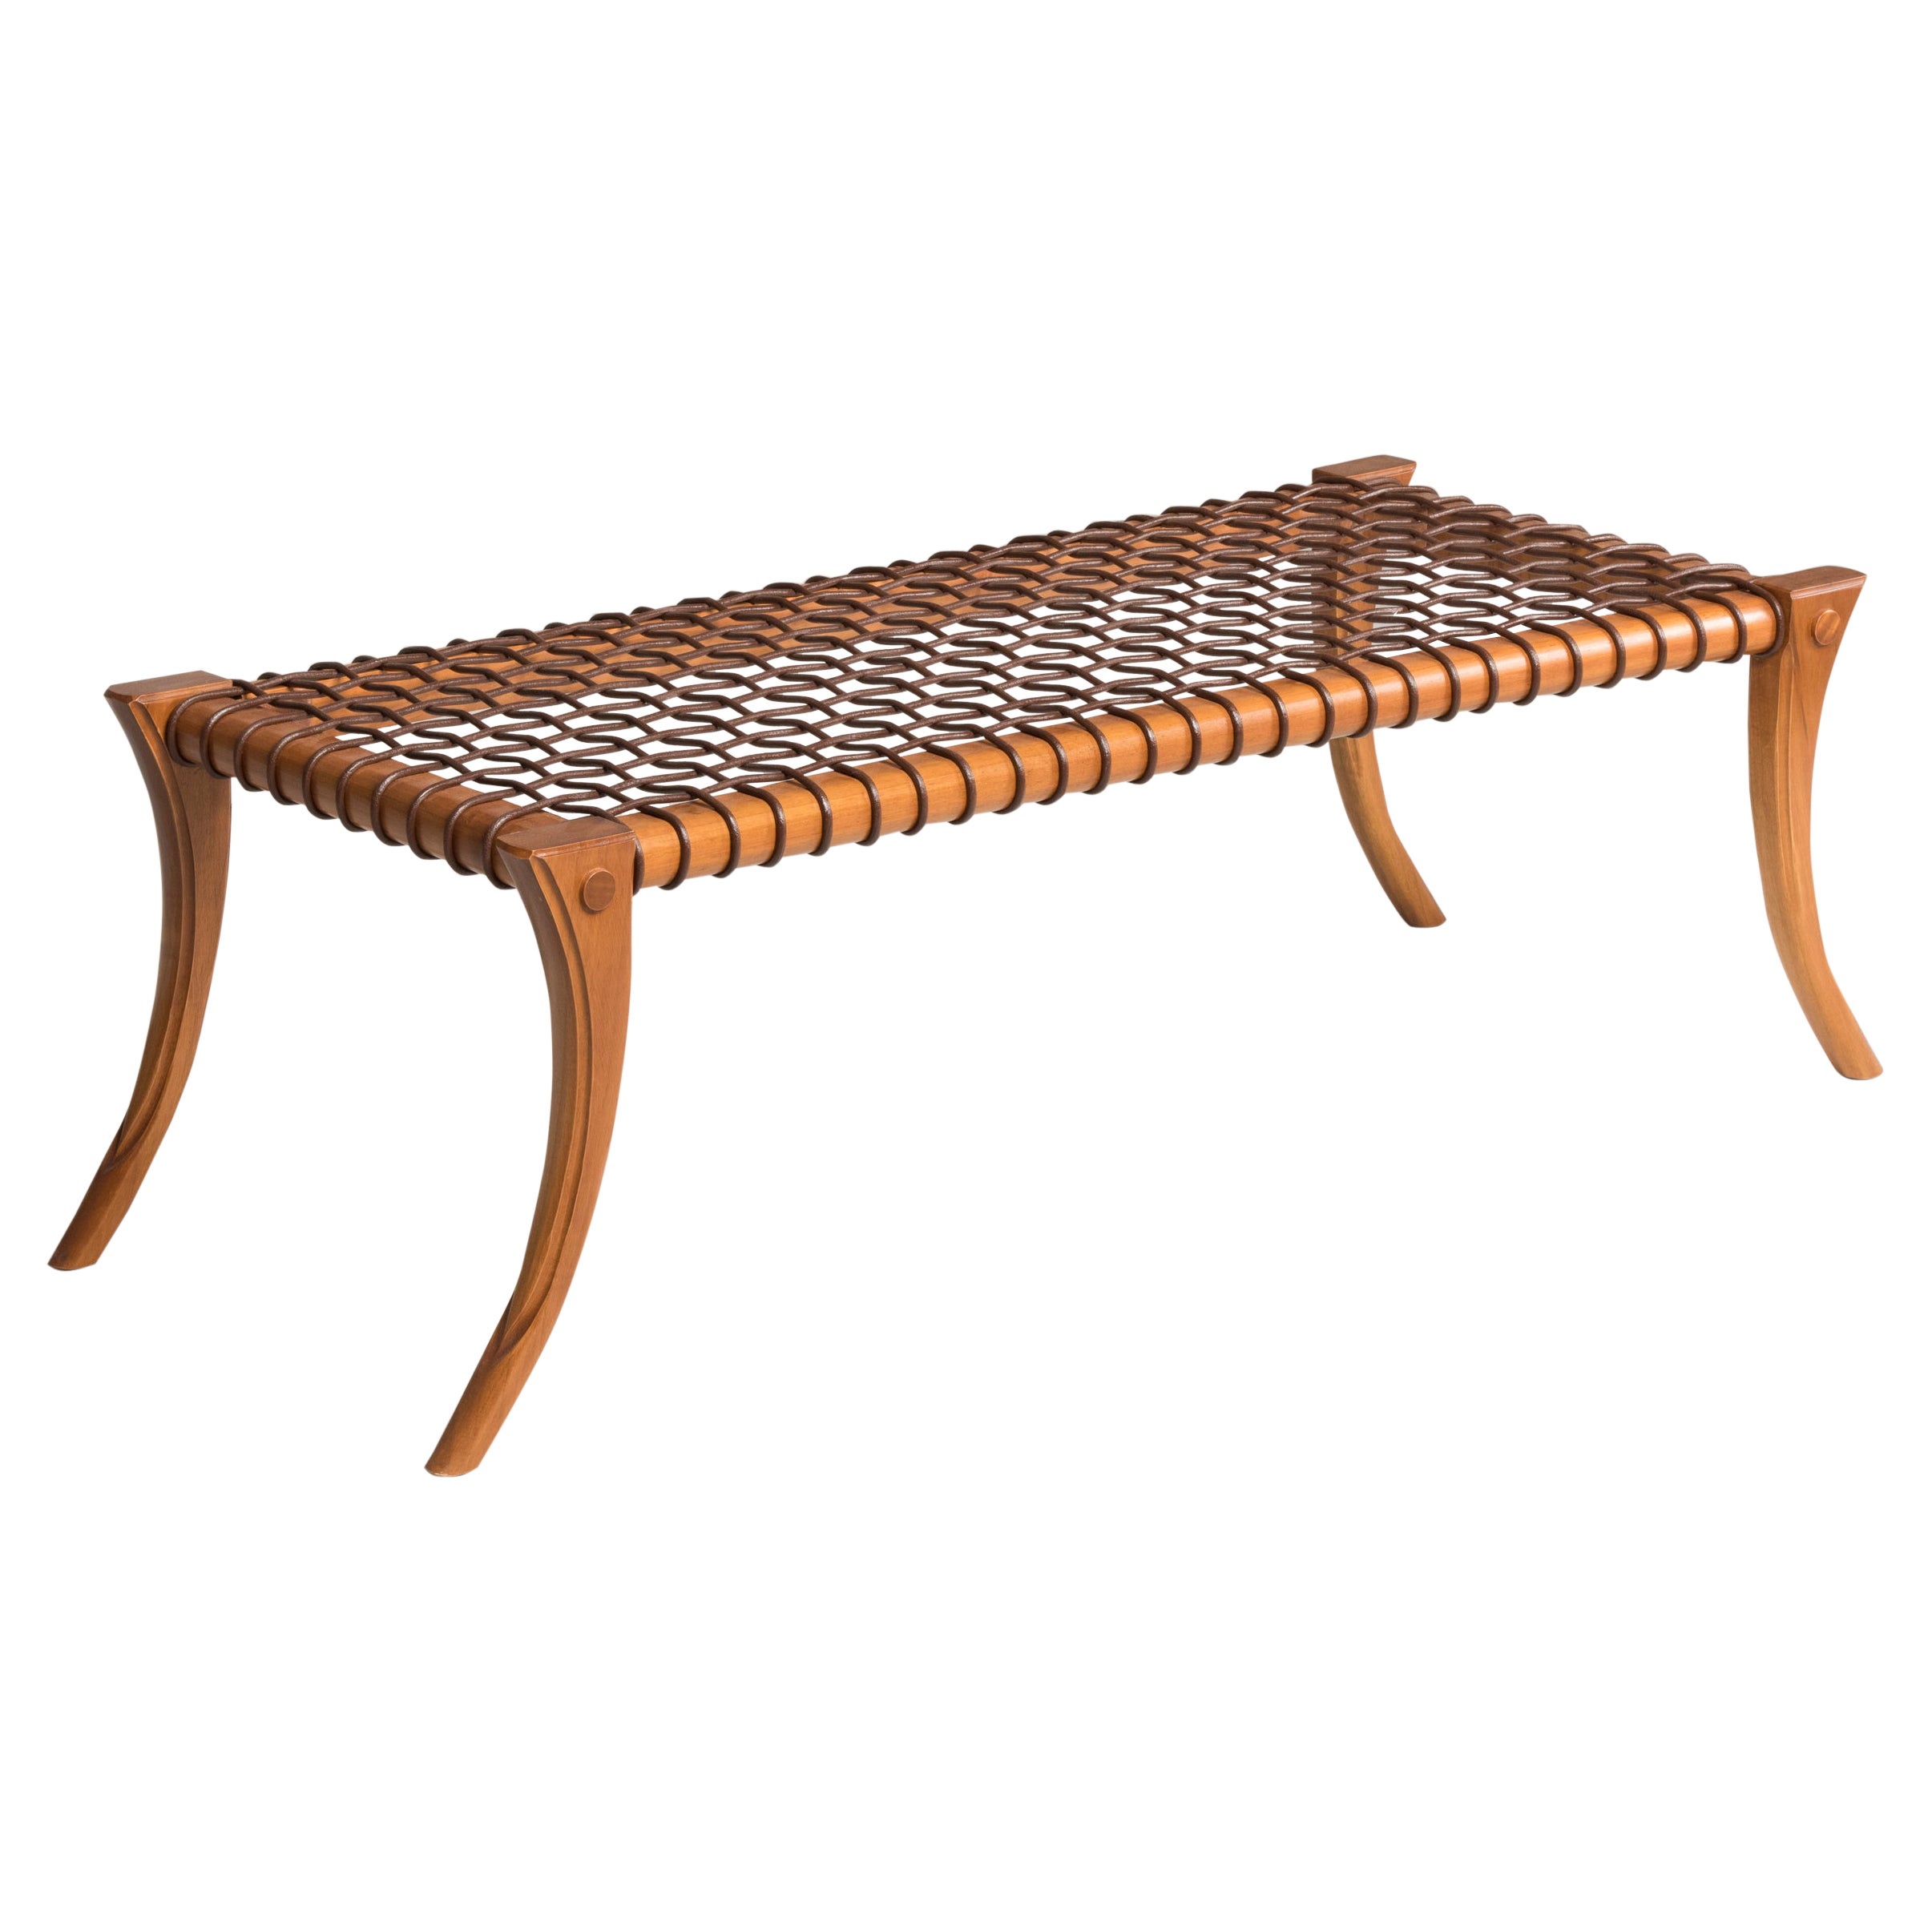 Klismos walnut wood brown woven leather Bench, Customizable Upholstery and Wood.

Other colors and upholstery are available. Italian artisanal production by Pescetta Home Decoration.

Walnut wood bench made in Italy. It is realized according to the